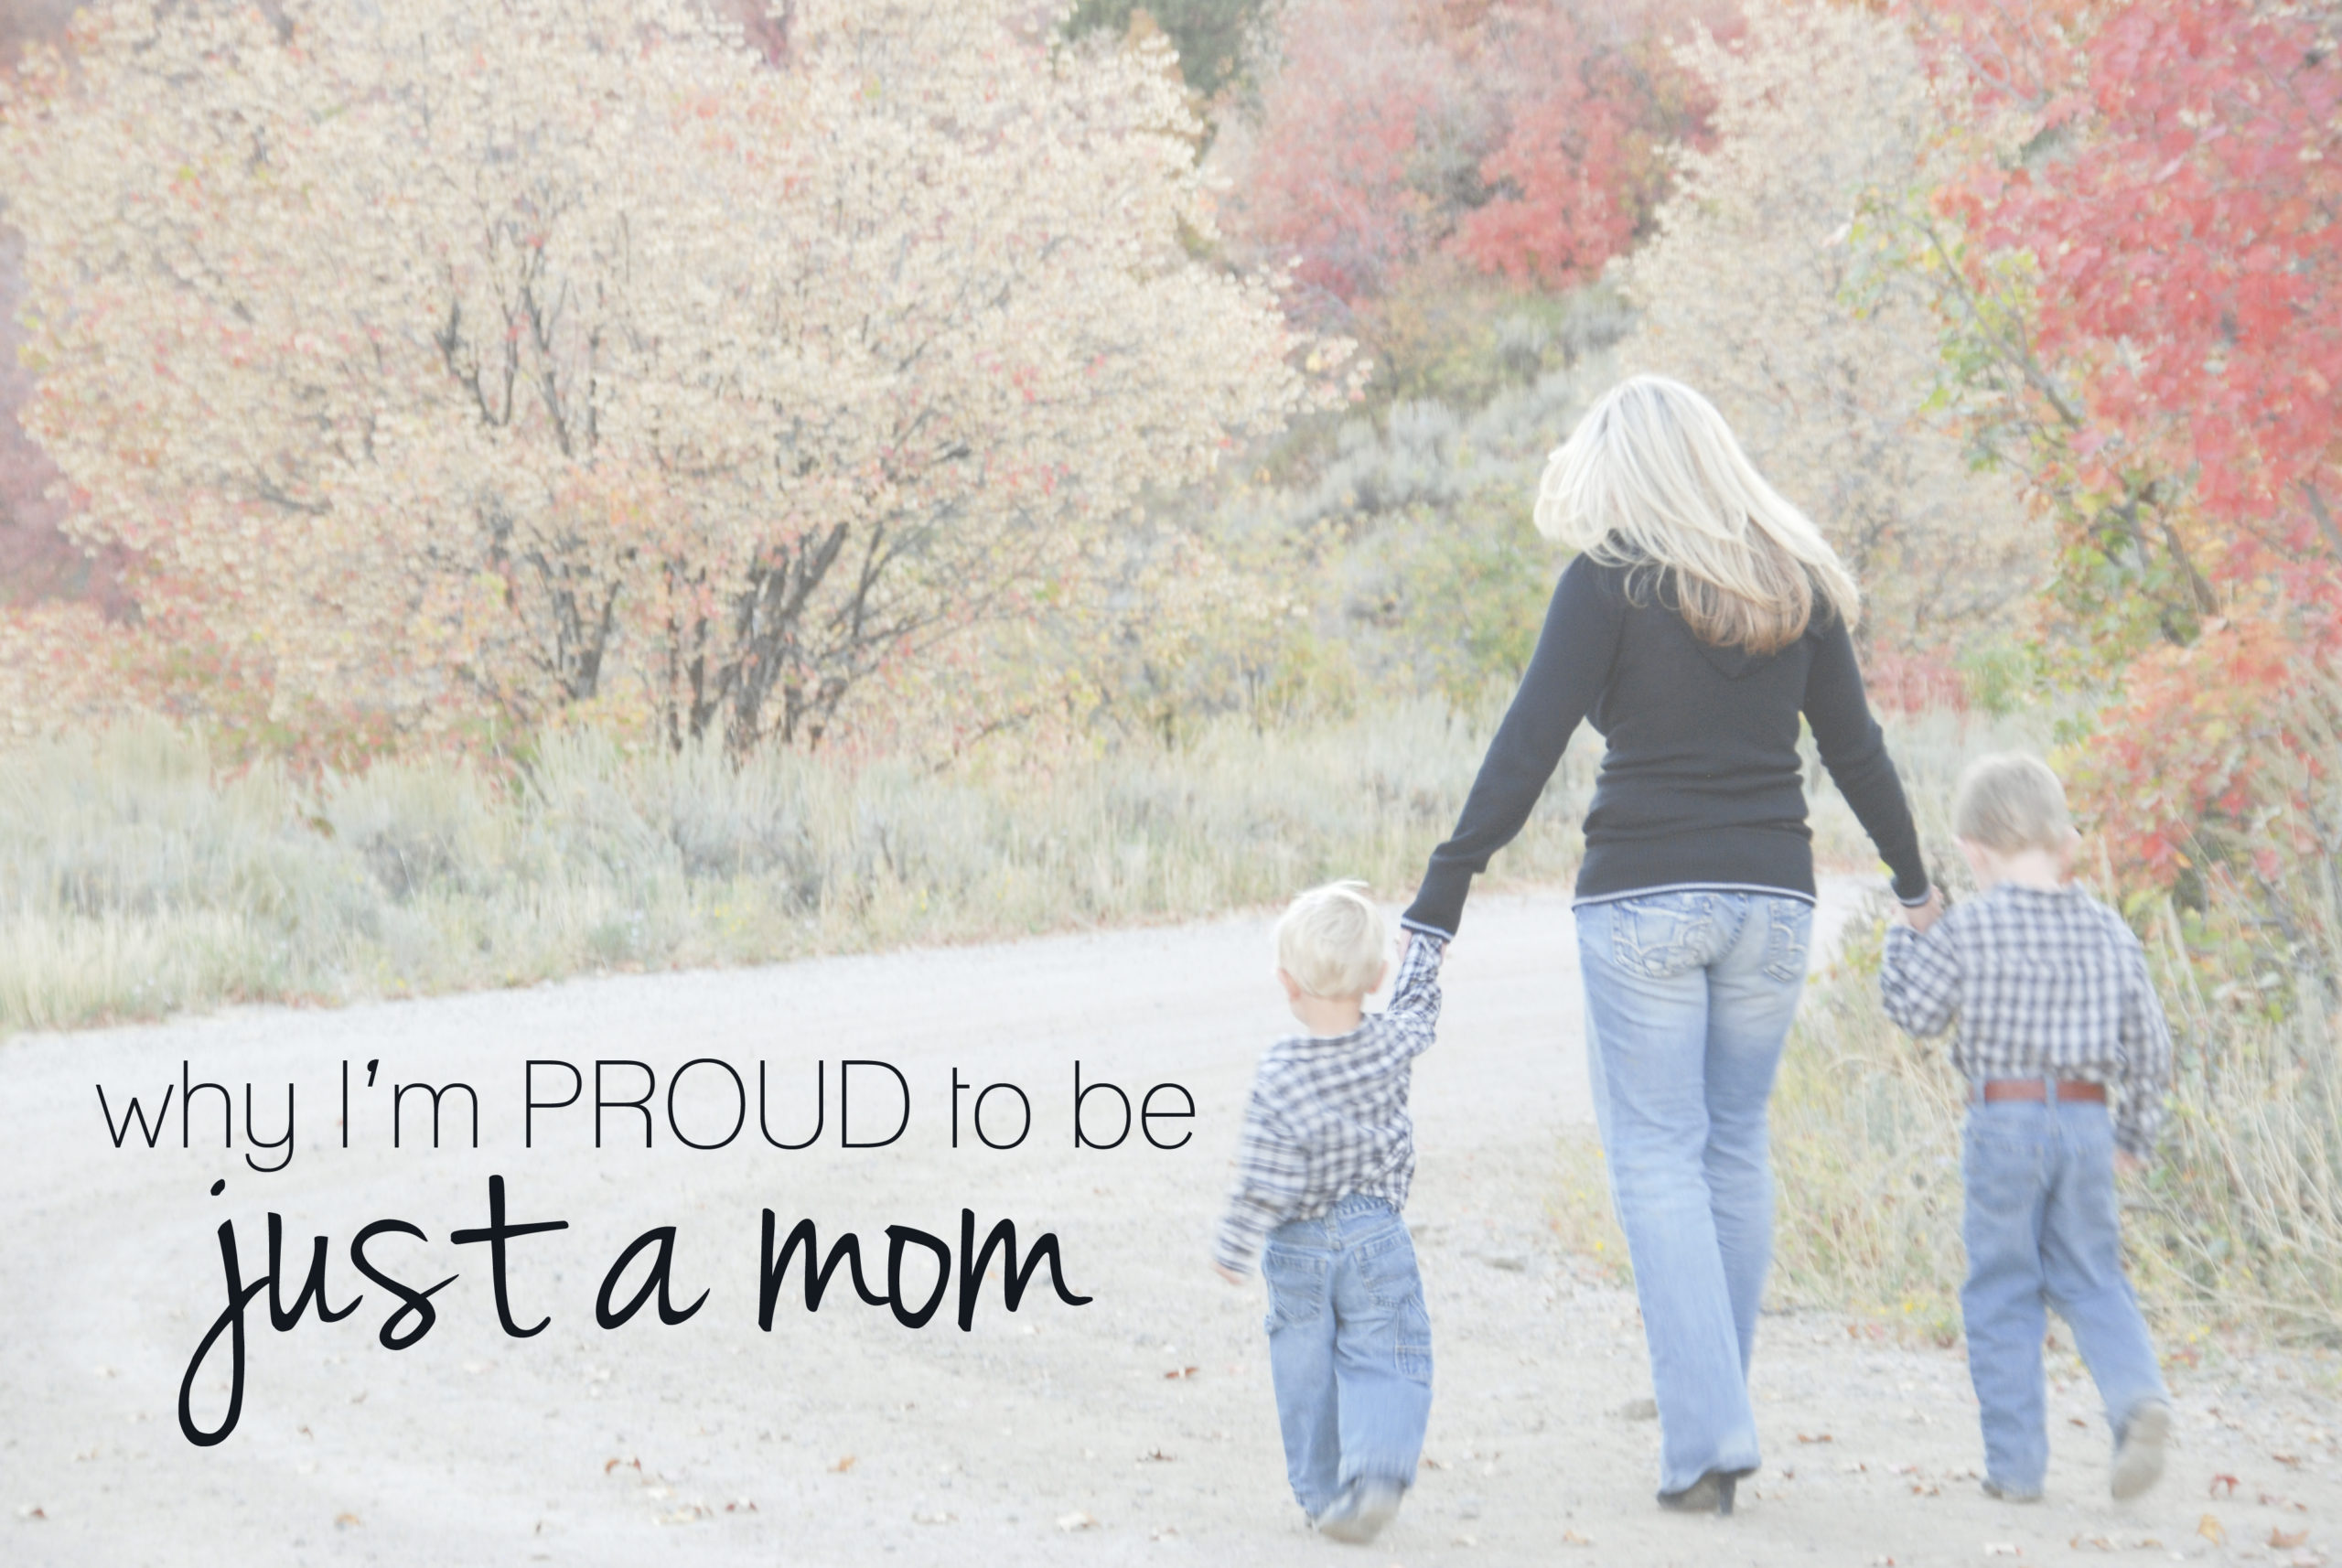 Proud to be “just a mom”